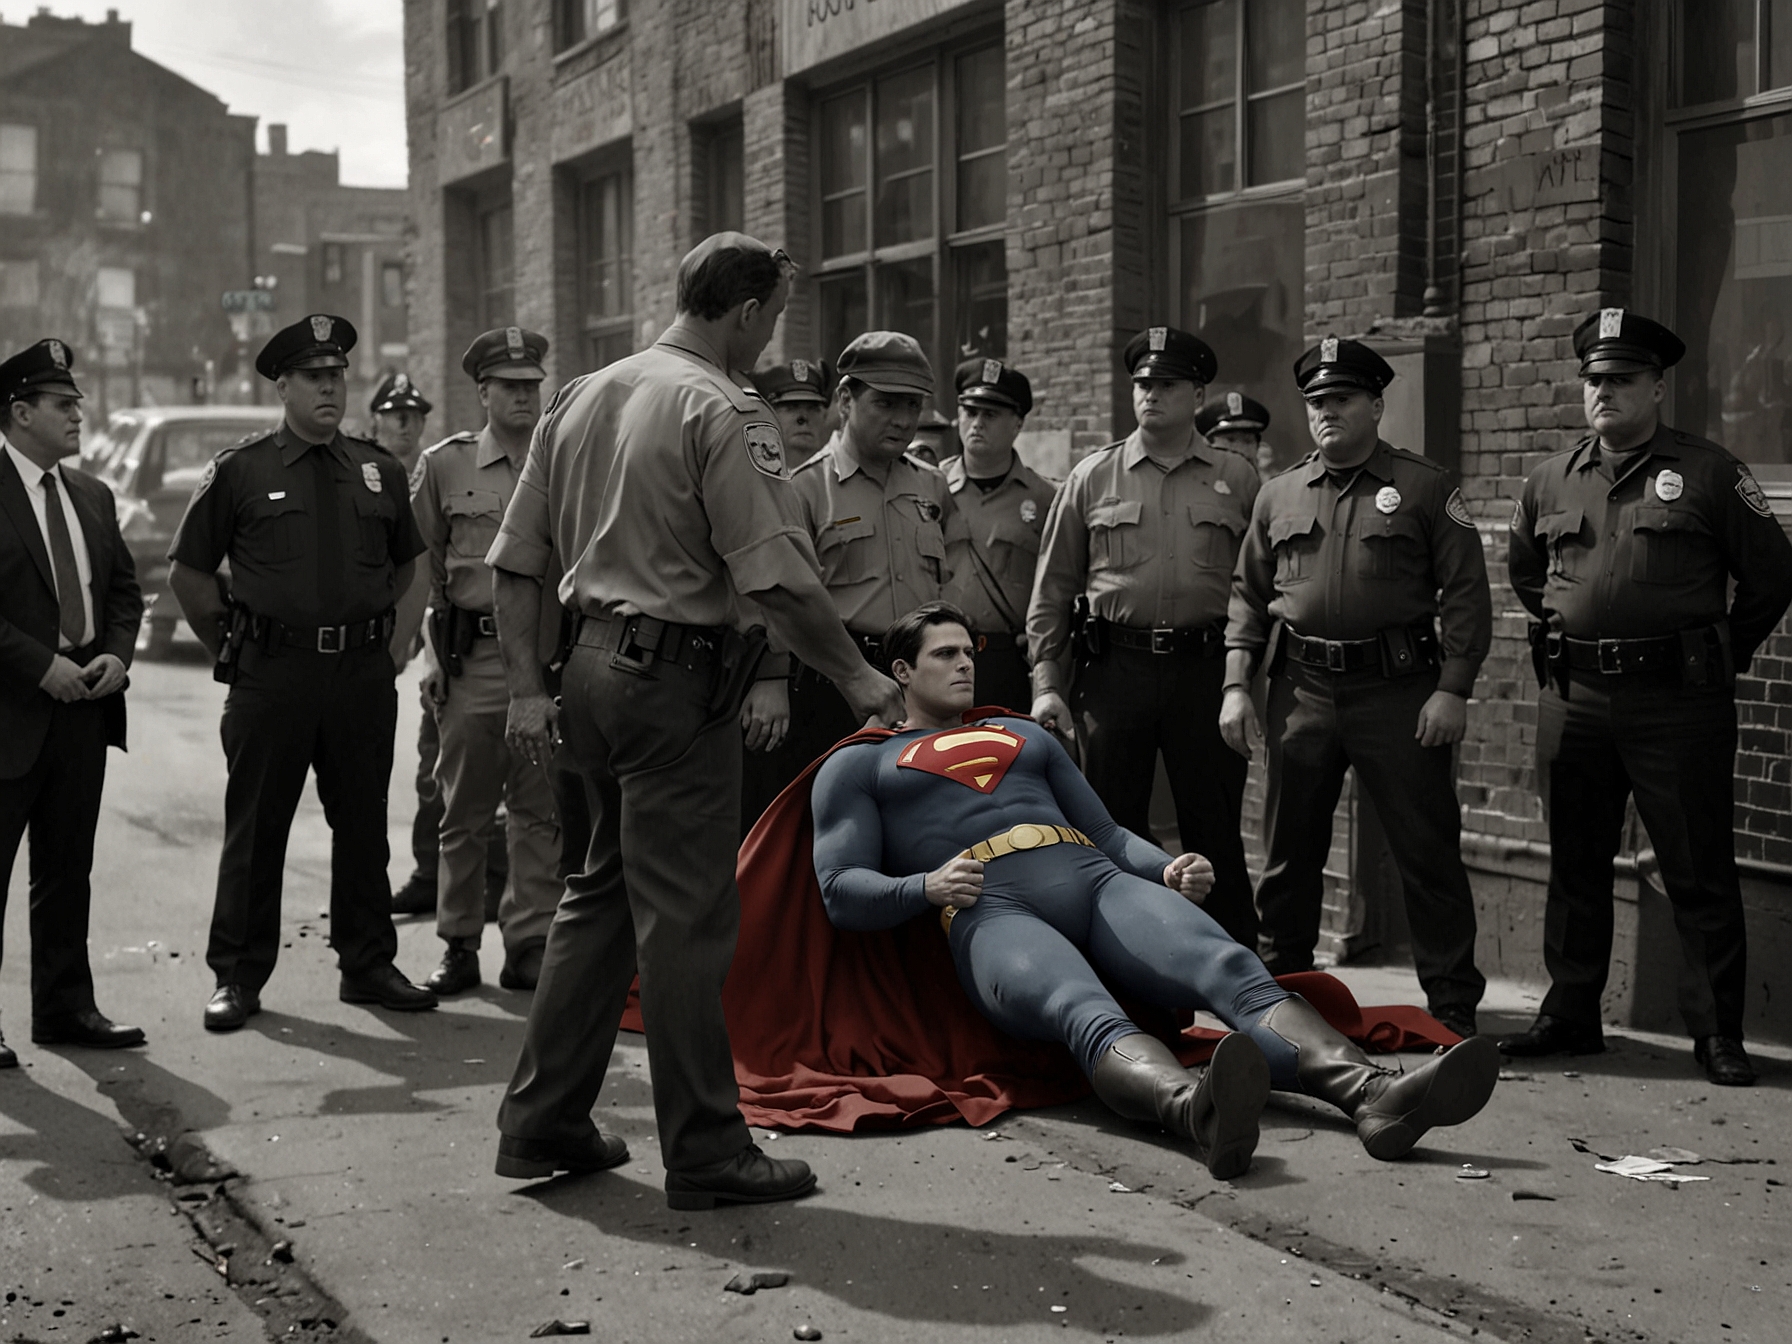 David Corenswet, dressed as Superman, being detained by authorities in a dynamic, high-tension scene filmed on a bustling Cleveland street.